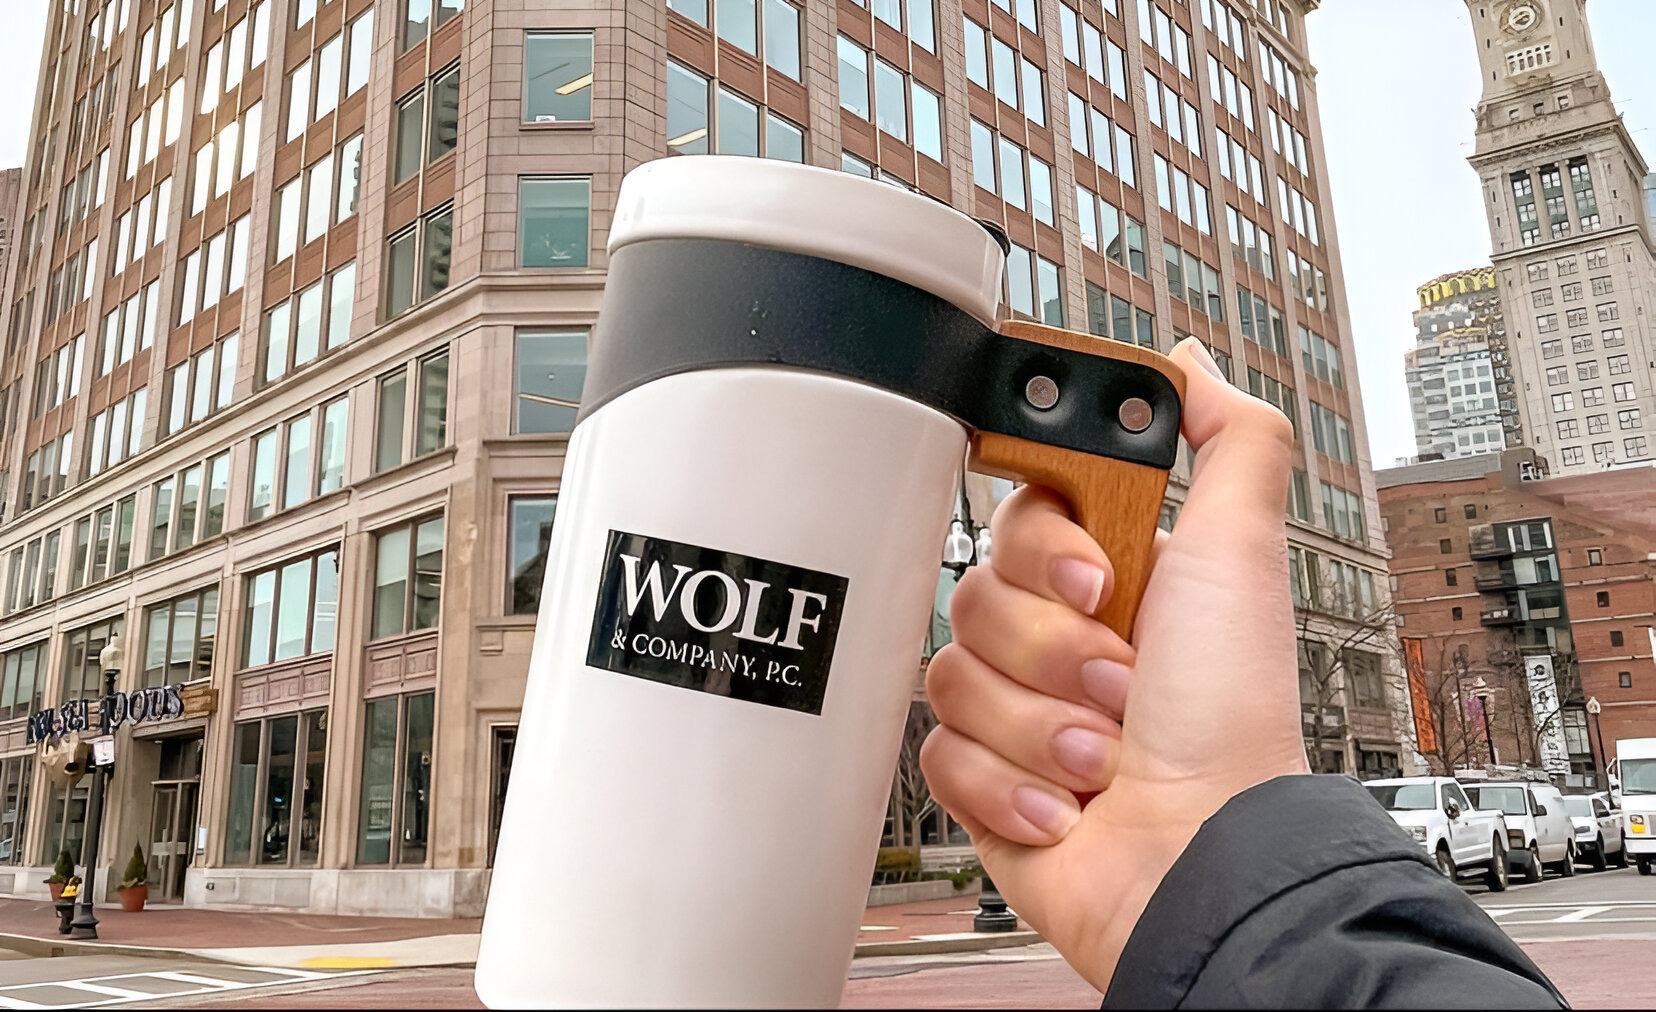 Wolf & Company Acquires Treehouse Technology Group